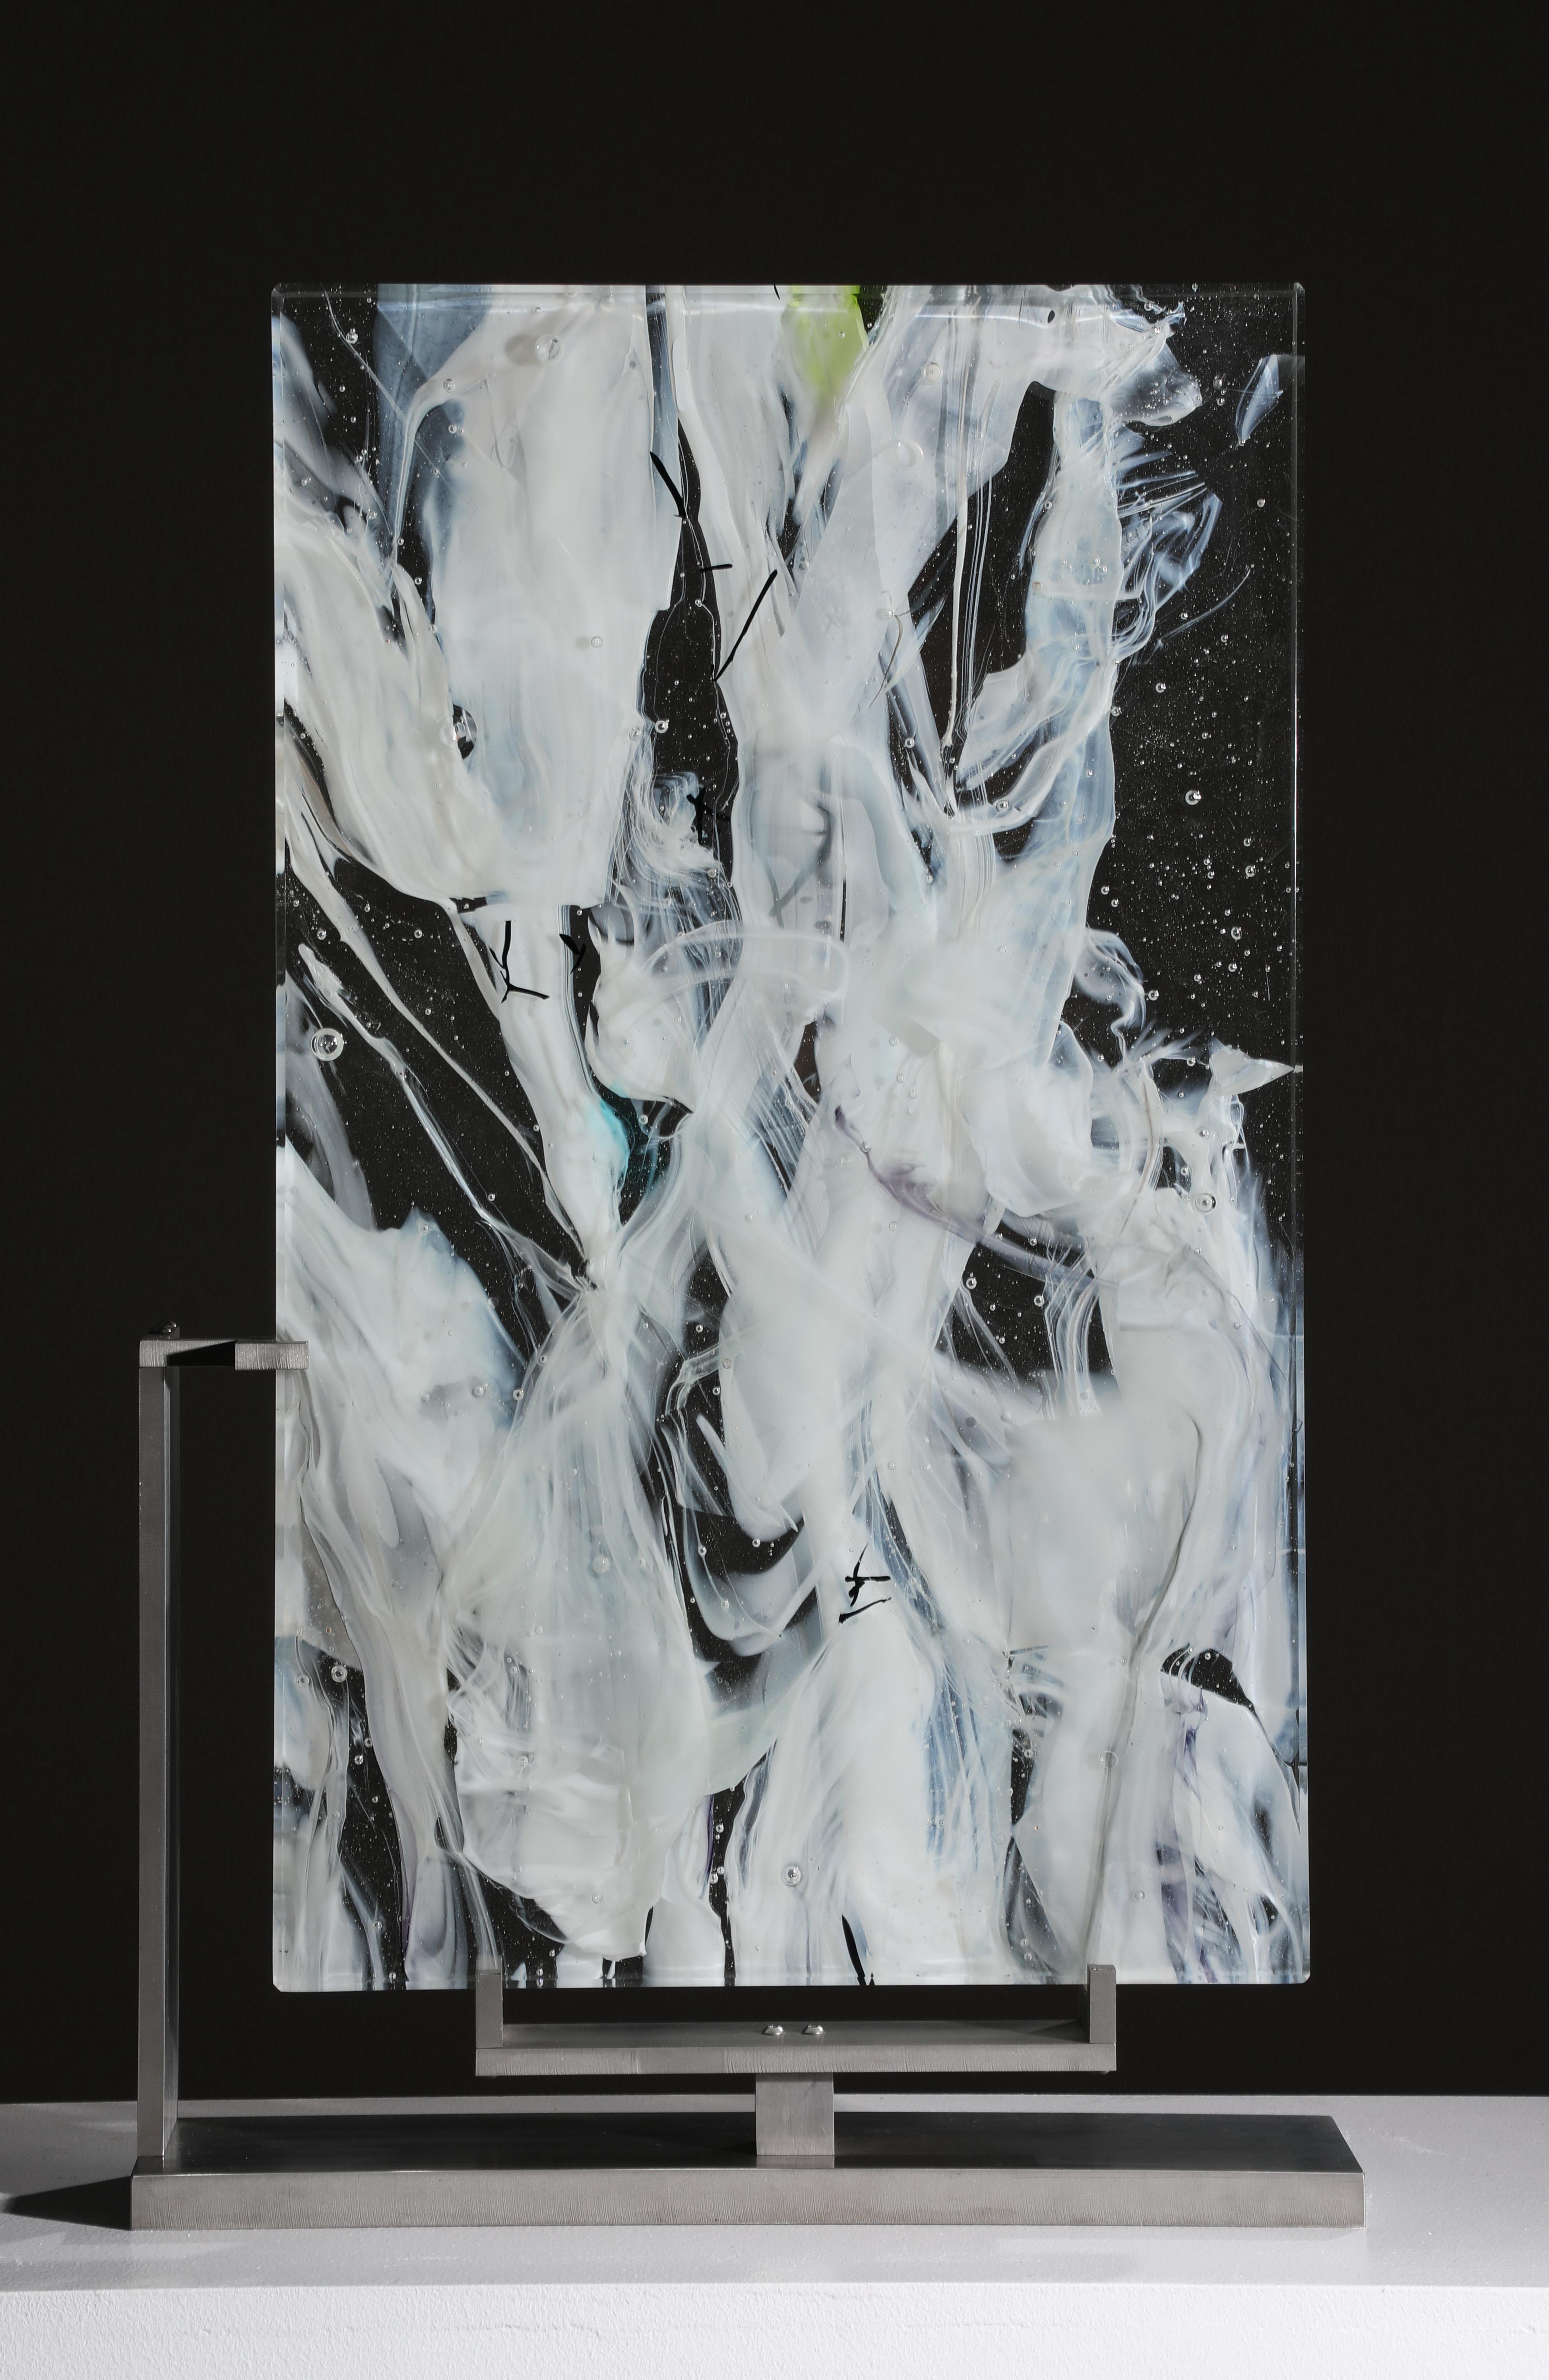 Cloud Study #4 is a contemporary abstract glass sculpture by David Ruth from his Cloud Study Series. It contains hues of white, yellow and black painterly brushstroke formations in glass called trails. Trails are created through rolling molten glass